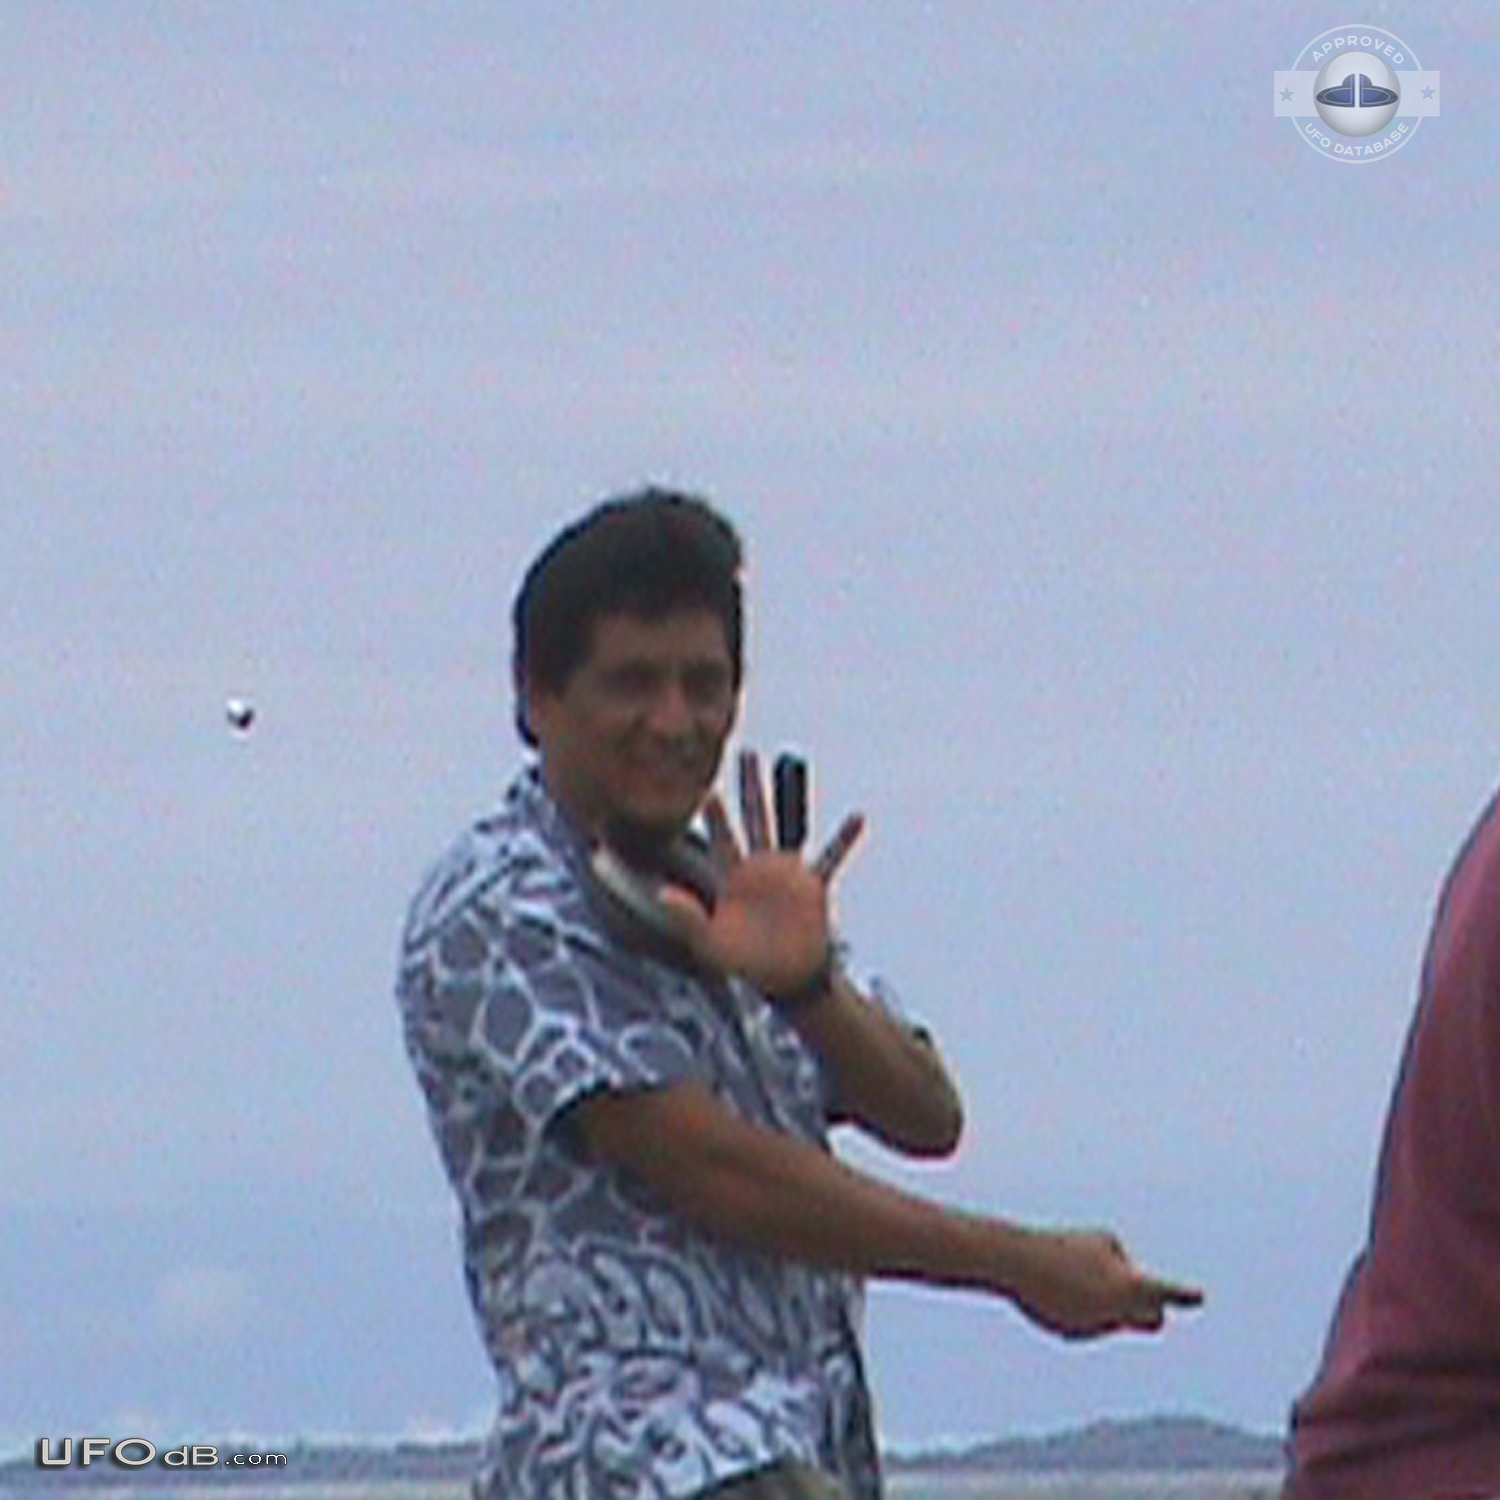 While fishing in Puntarenas Costa Rica a photo captures UFO UFO Picture #834-2